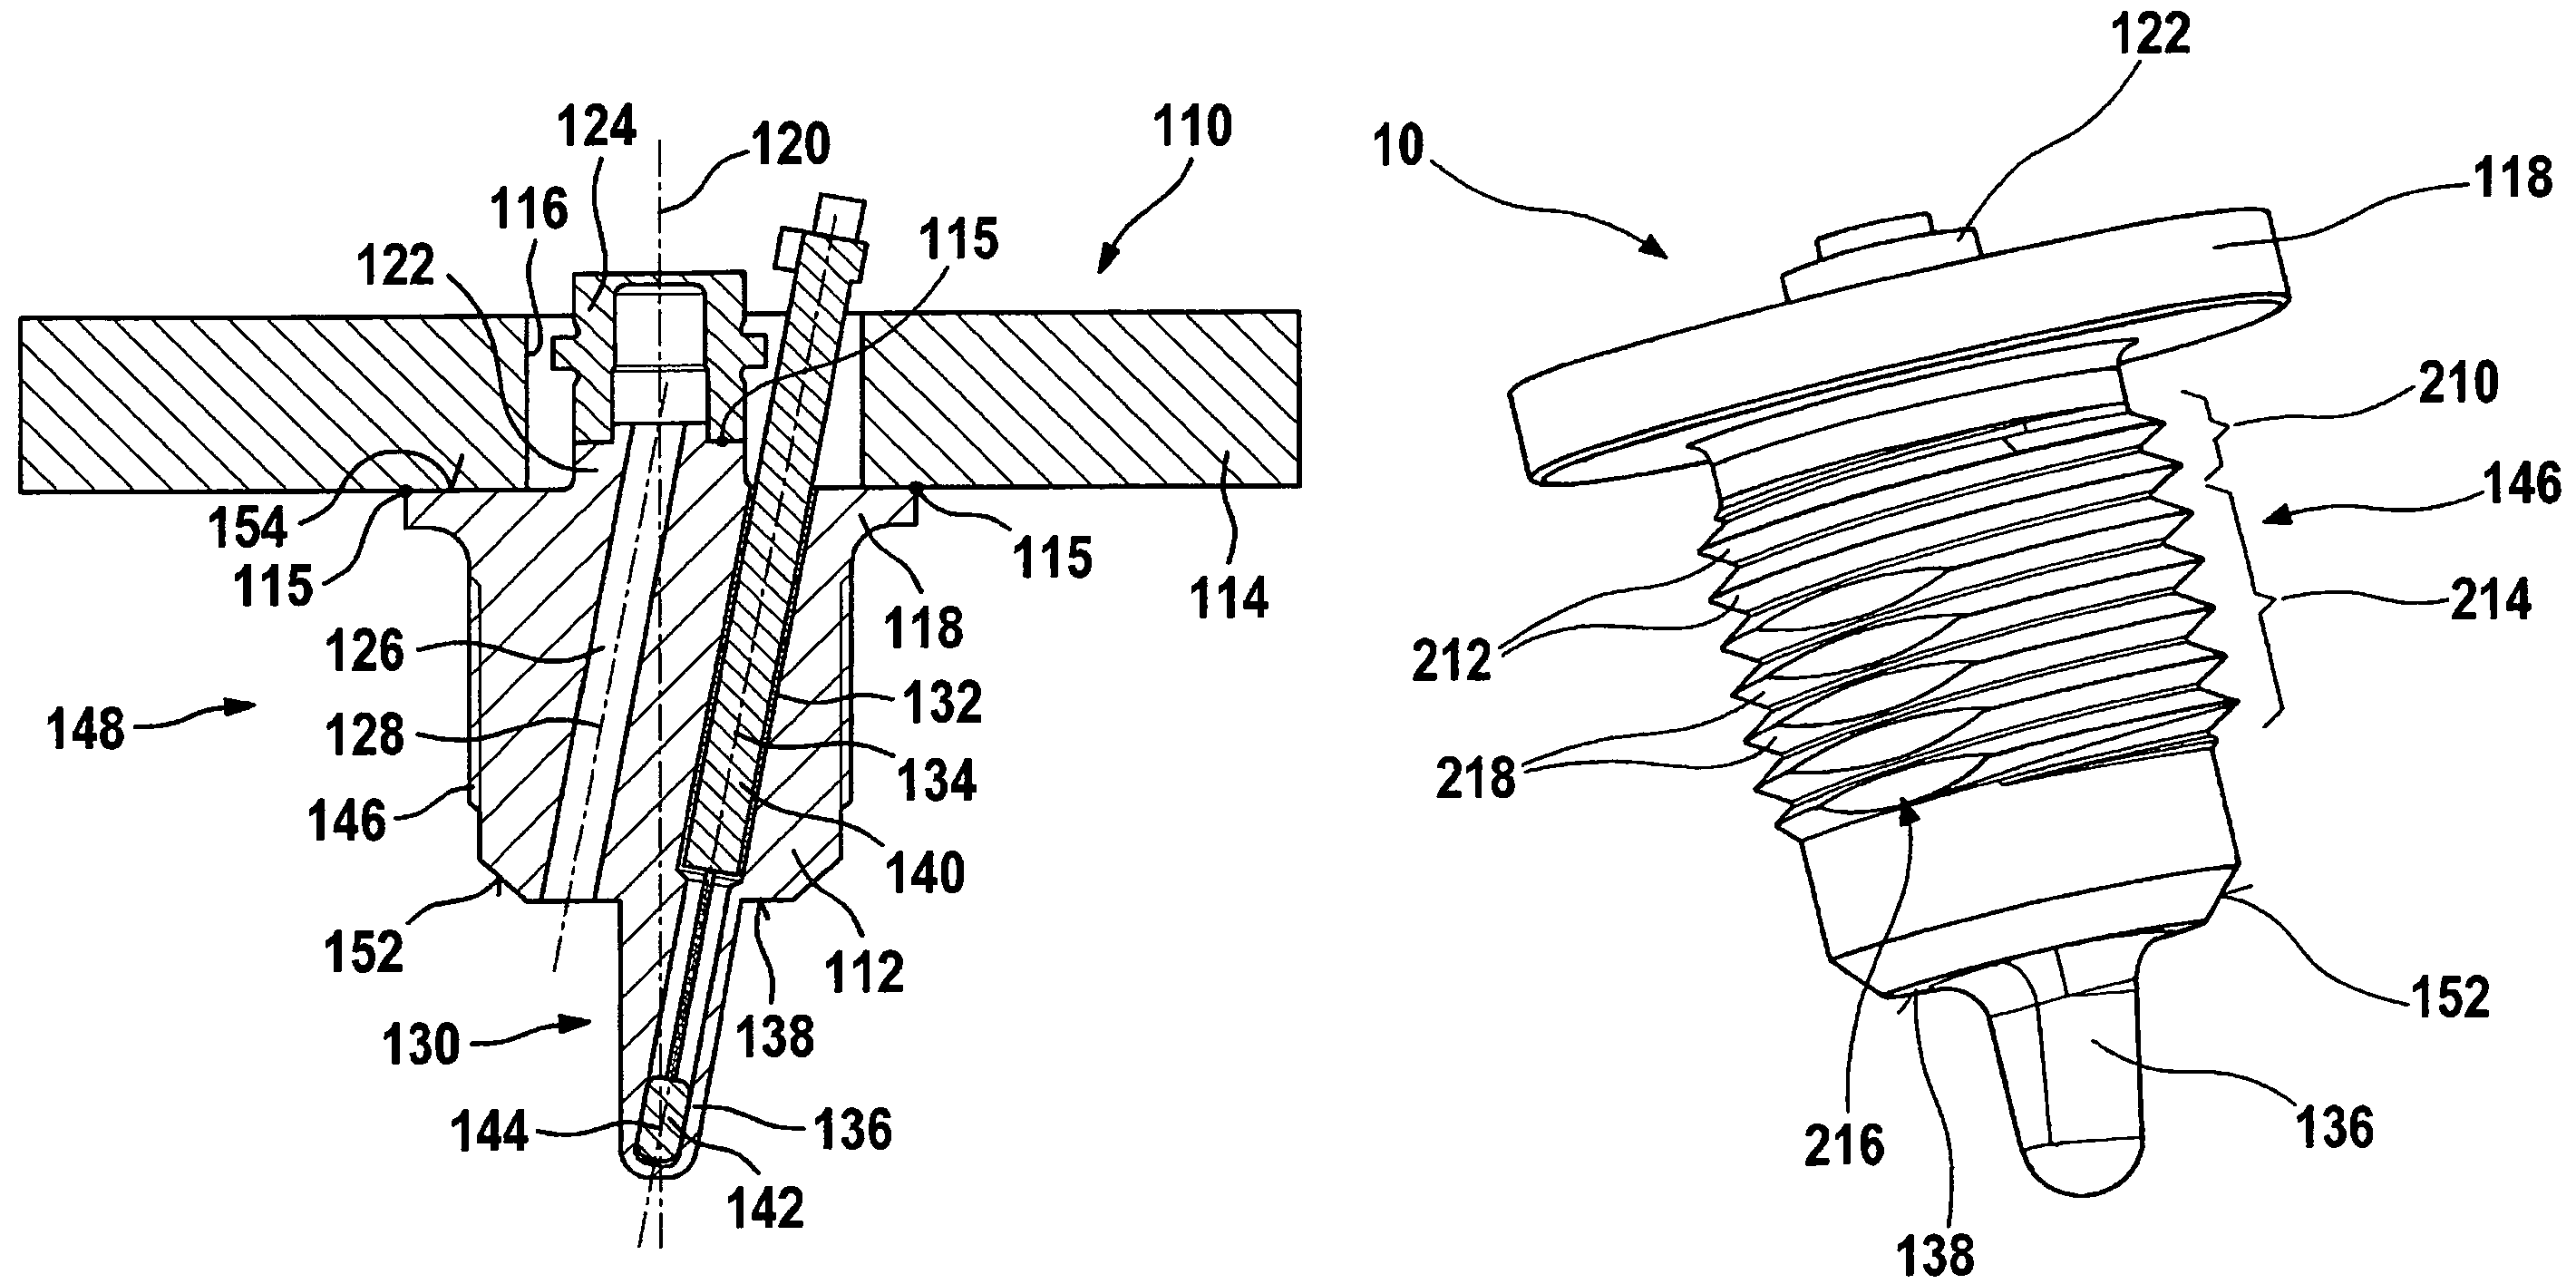 Plug-in sensor for measuring at least one property of a fluid medium